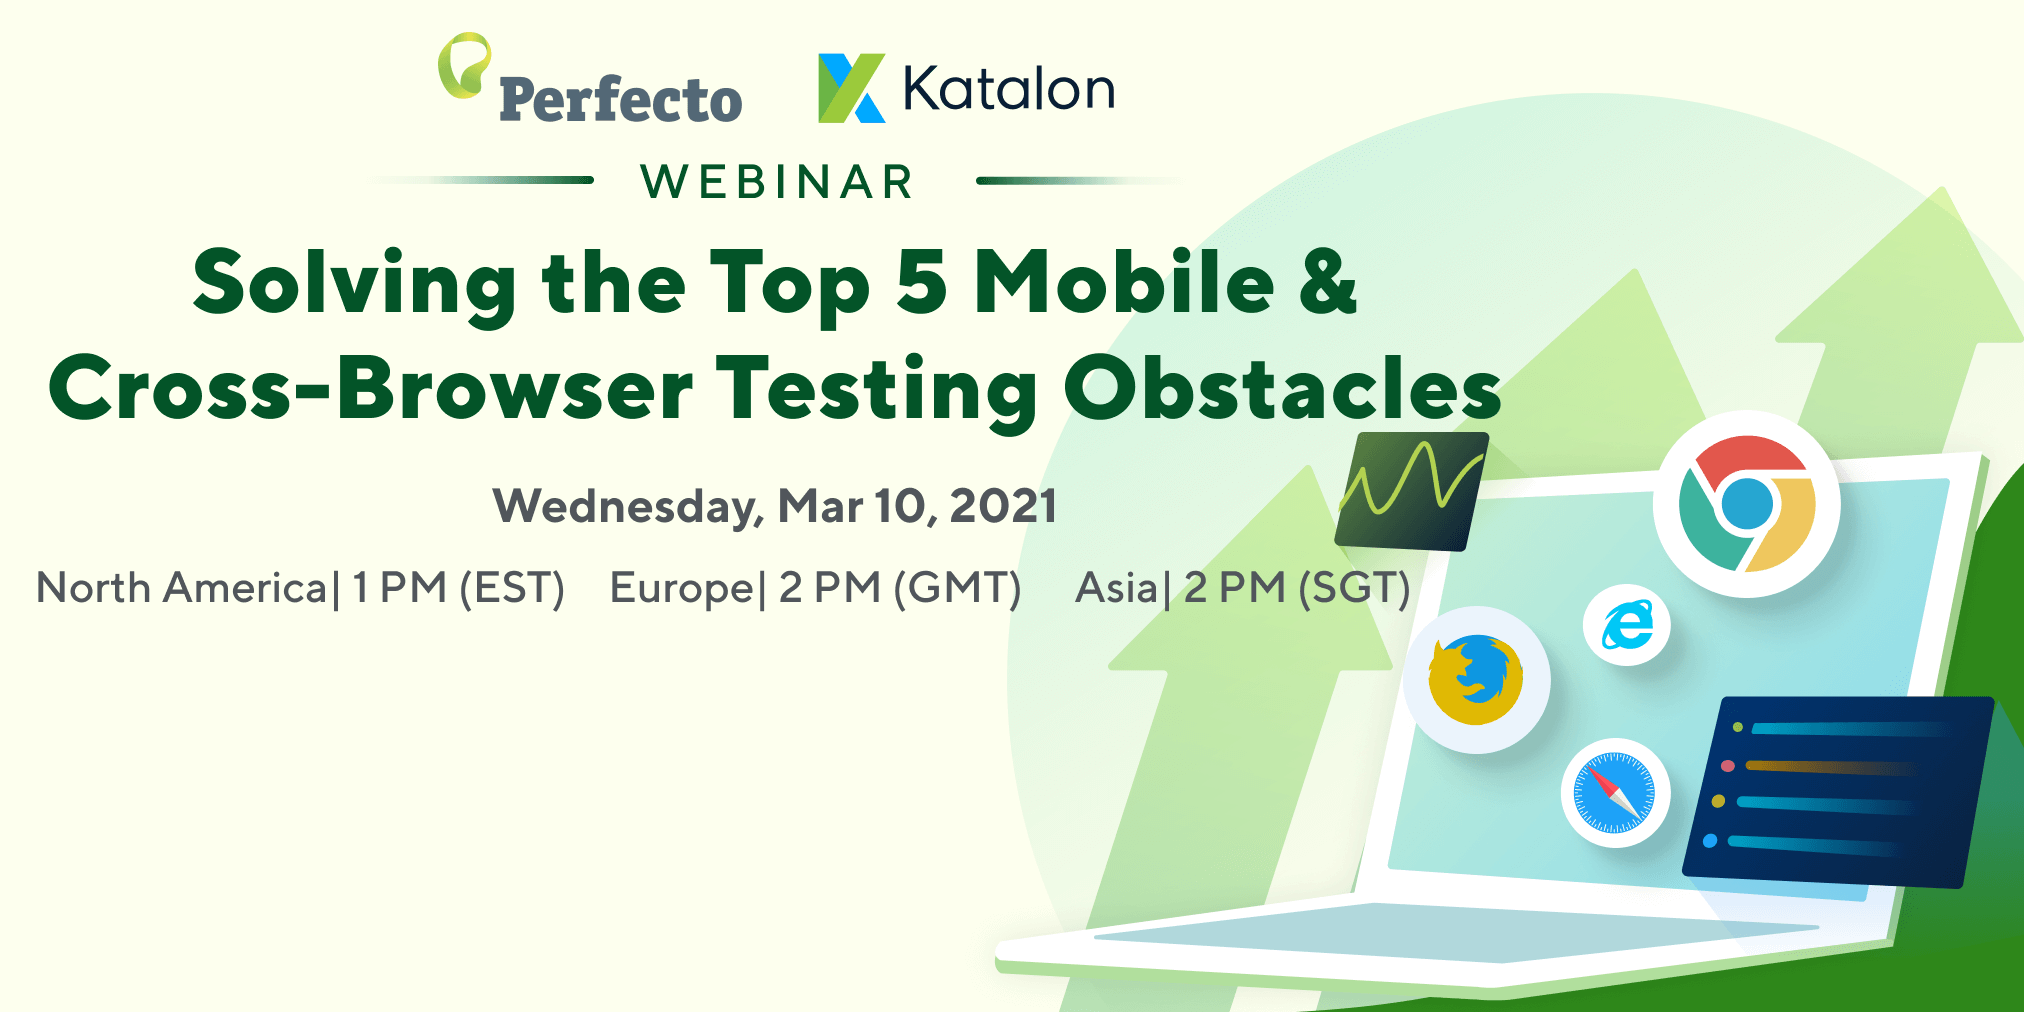 Solving the Top 5 Mobile & Cross-Browser Testing Obstacles With Perfecto & Katalon